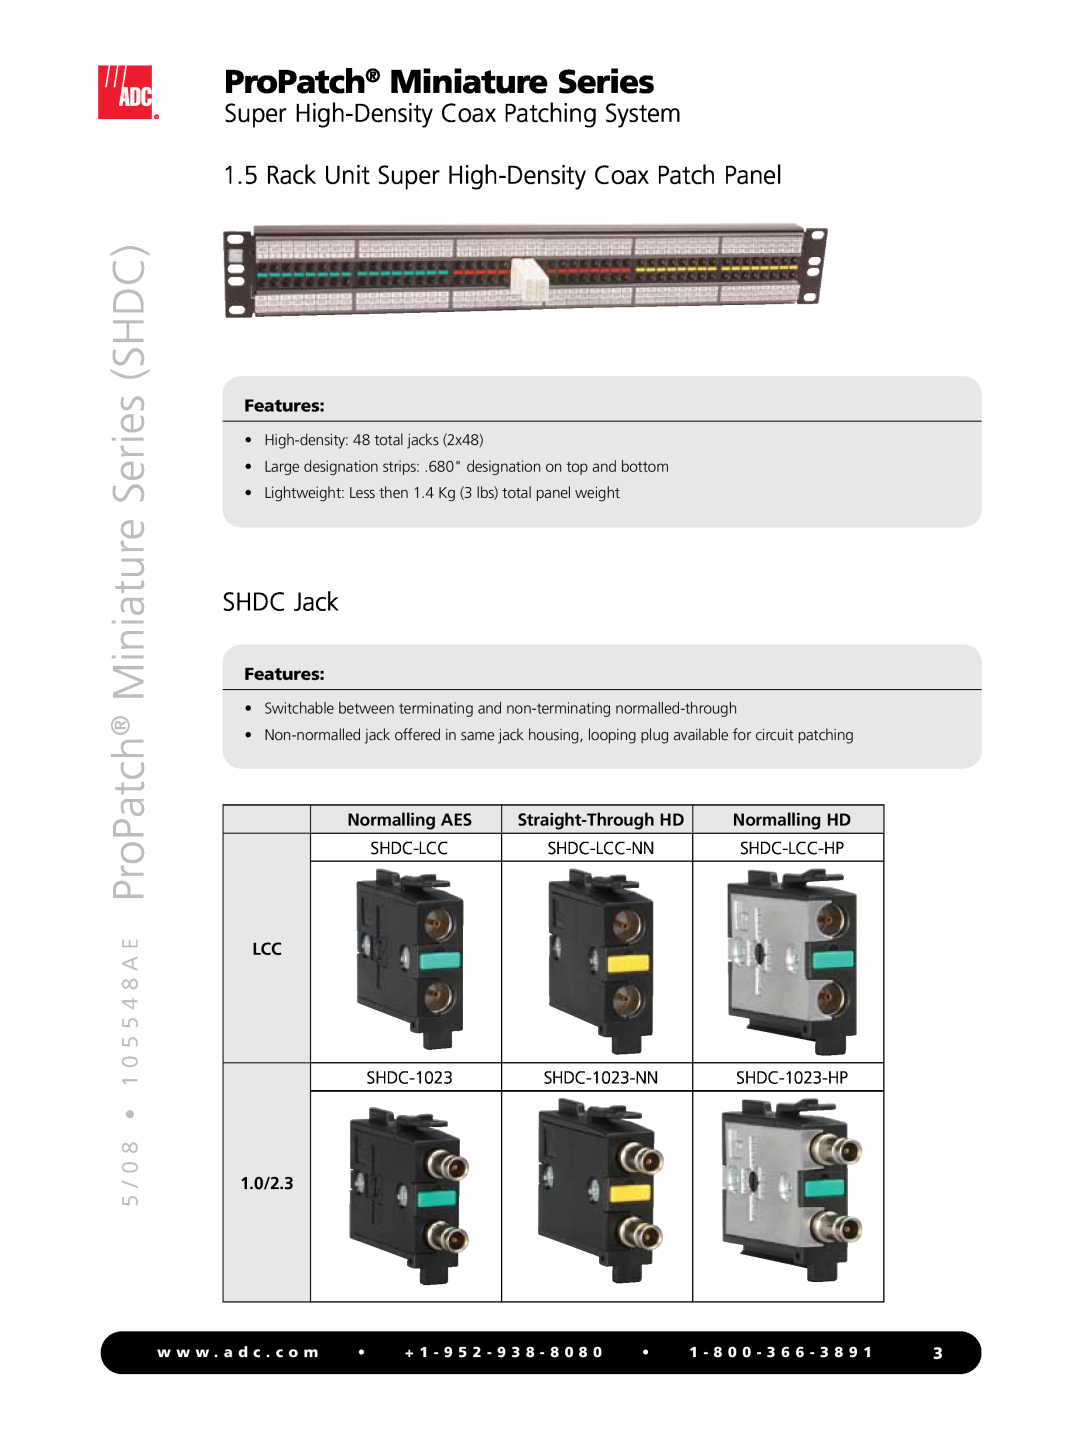 ADC SHDC Jack, 1.0/2.3, 5 / 0 8 1 0 5 5 4 8 A E ProPatch Miniature Series SHDC, Super High-Density Coax Patching System 